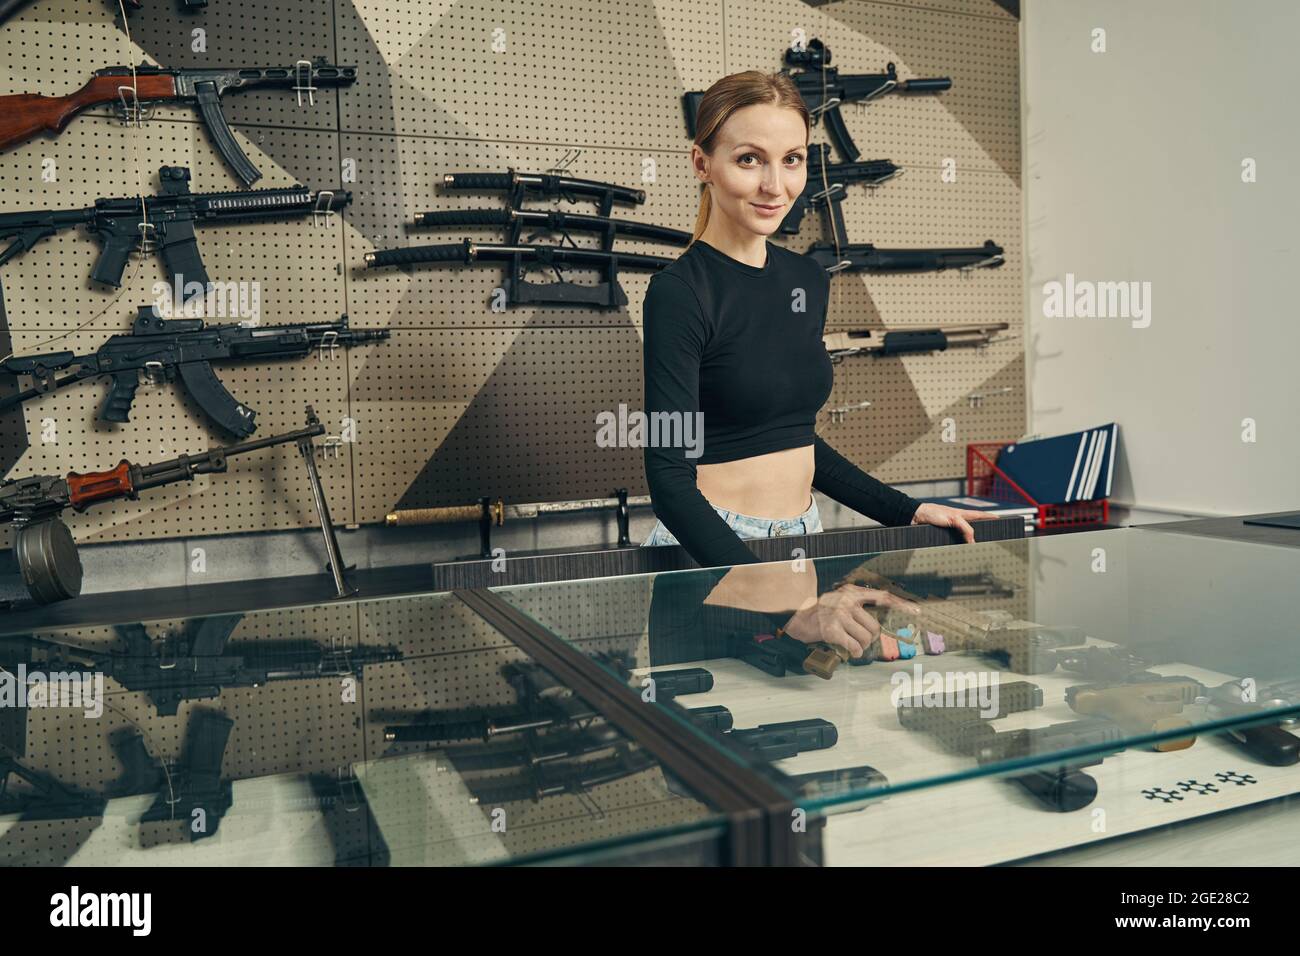 Young saleslady posing for the camera at the gun store Stock Photo